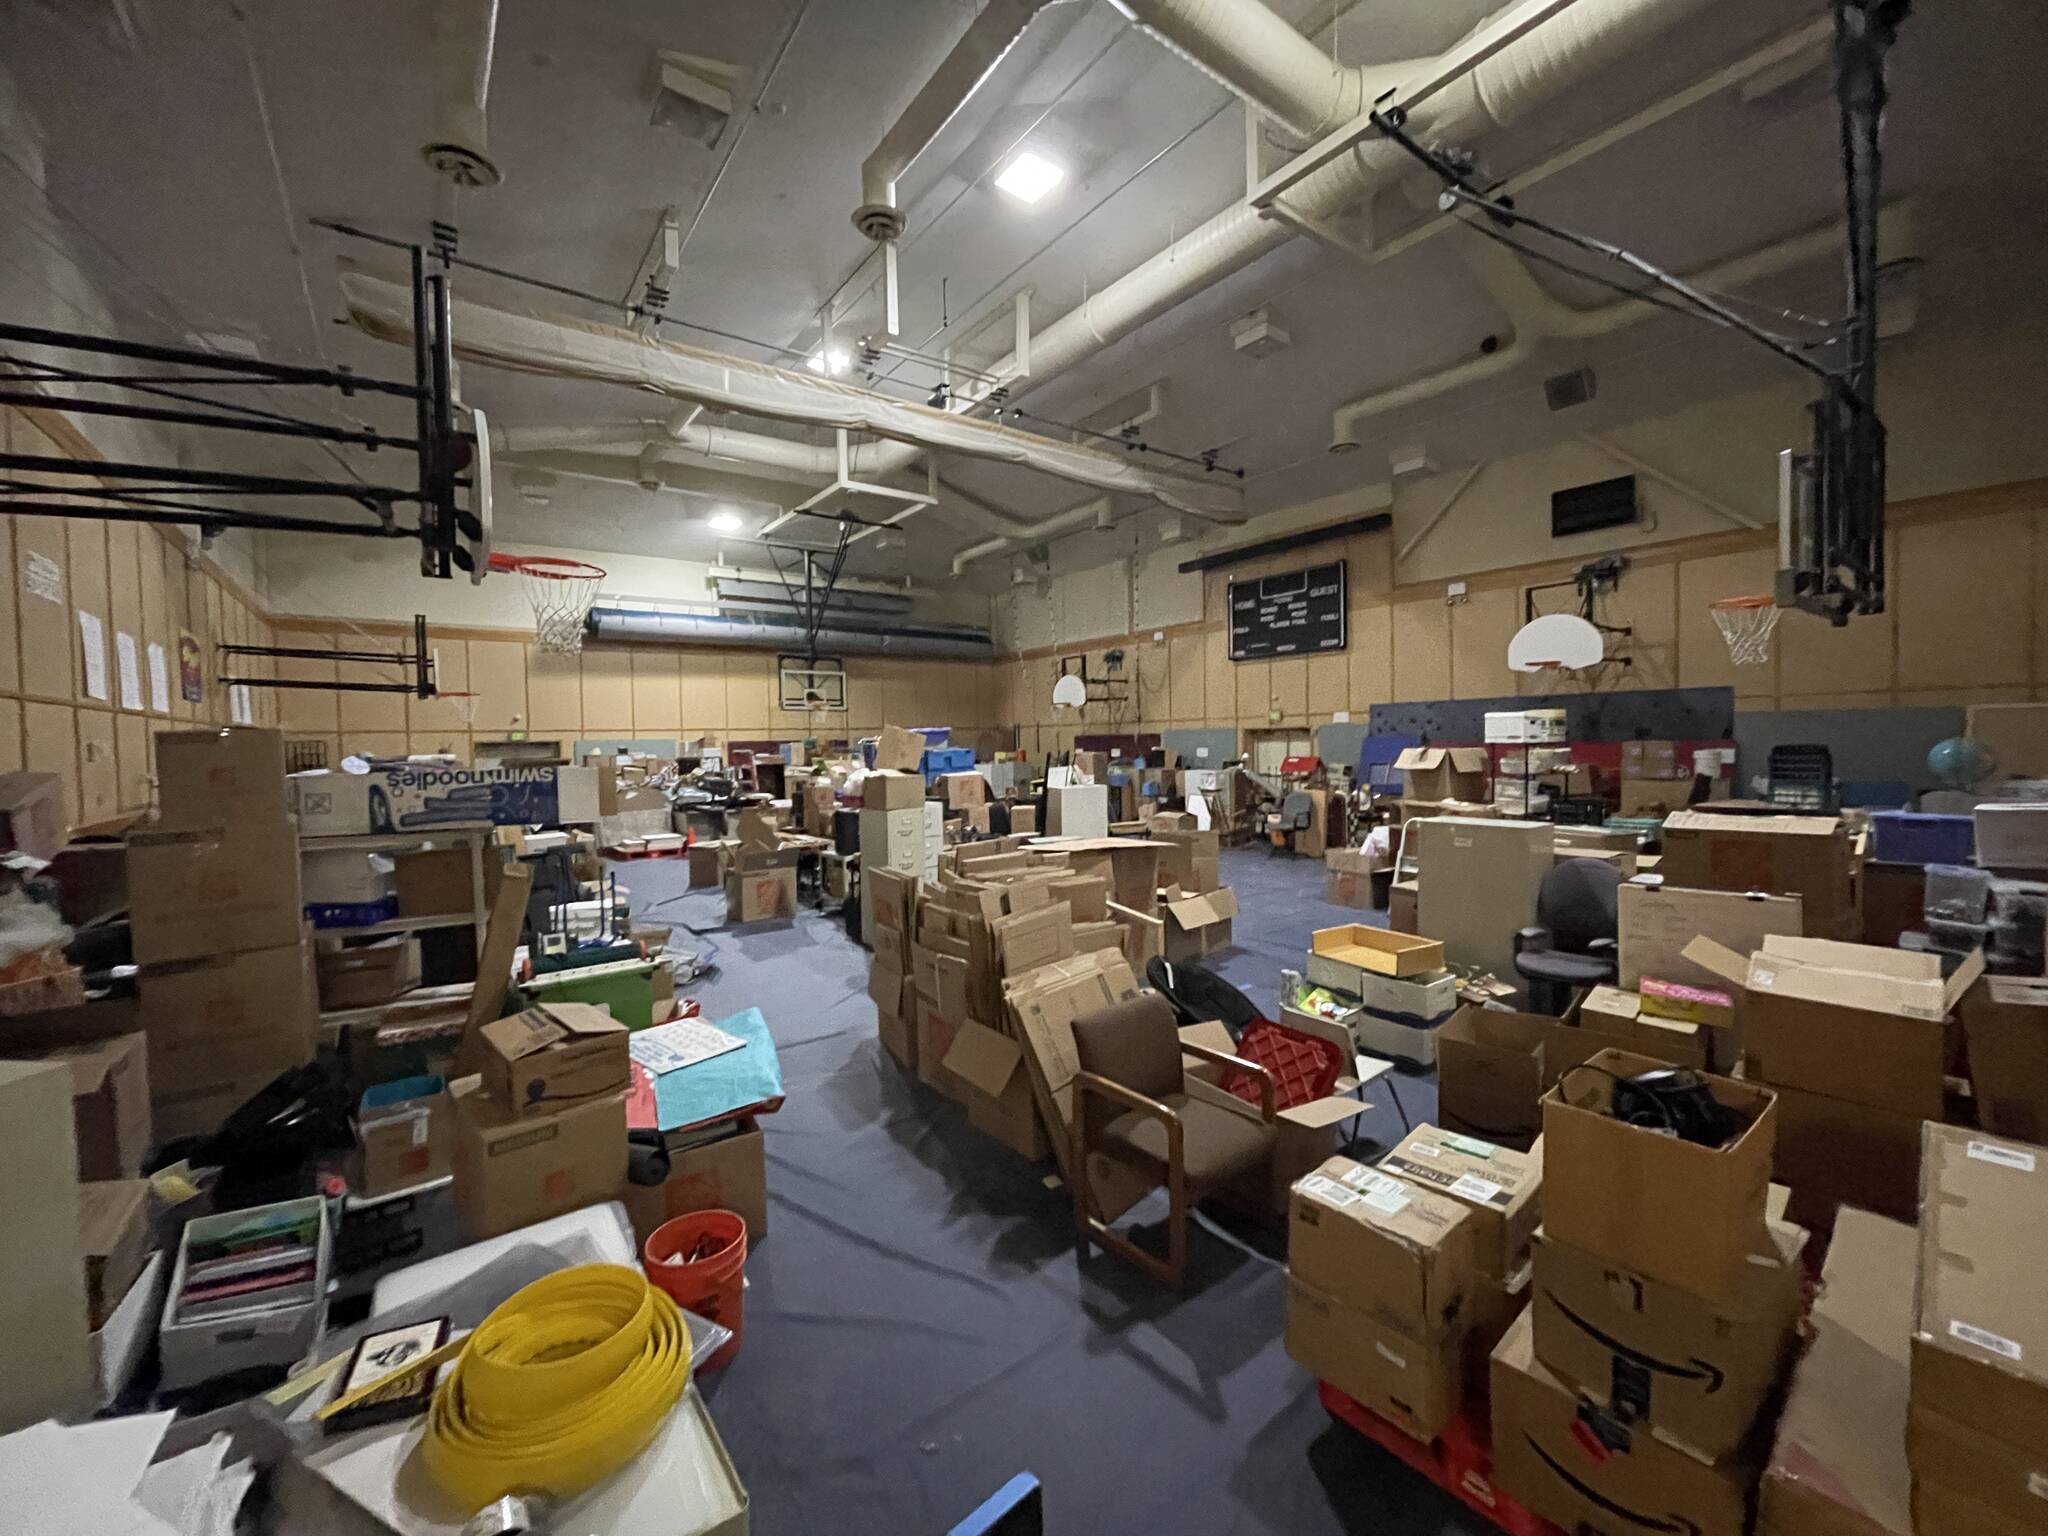 Michael S. Lockett / Juneau Empire 
Riverbend Elementary School’s gym is currently serving as a storage area as the school prepares for major repairs from flooding and separately, to the school’s roof.